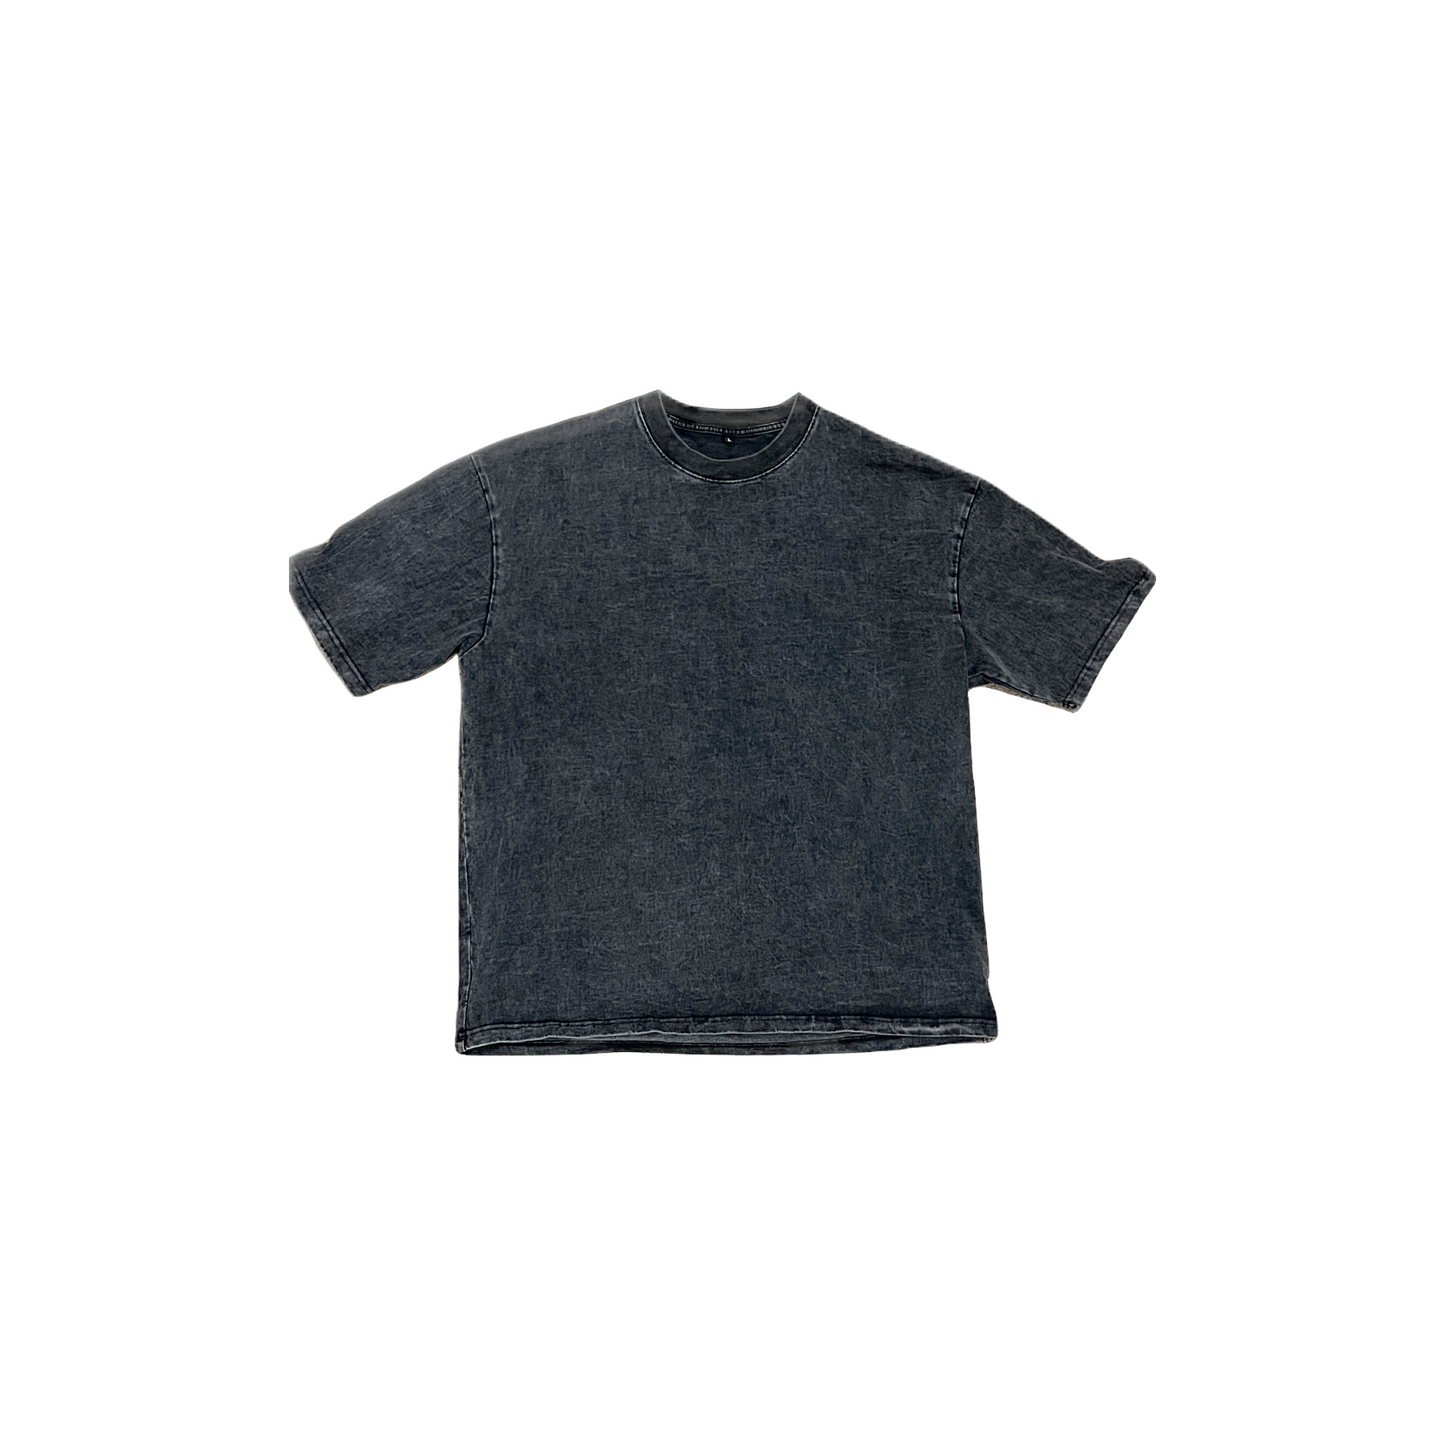 THE ETHICAL TEE - Boxy Cut Vintage Wash T-Shirt